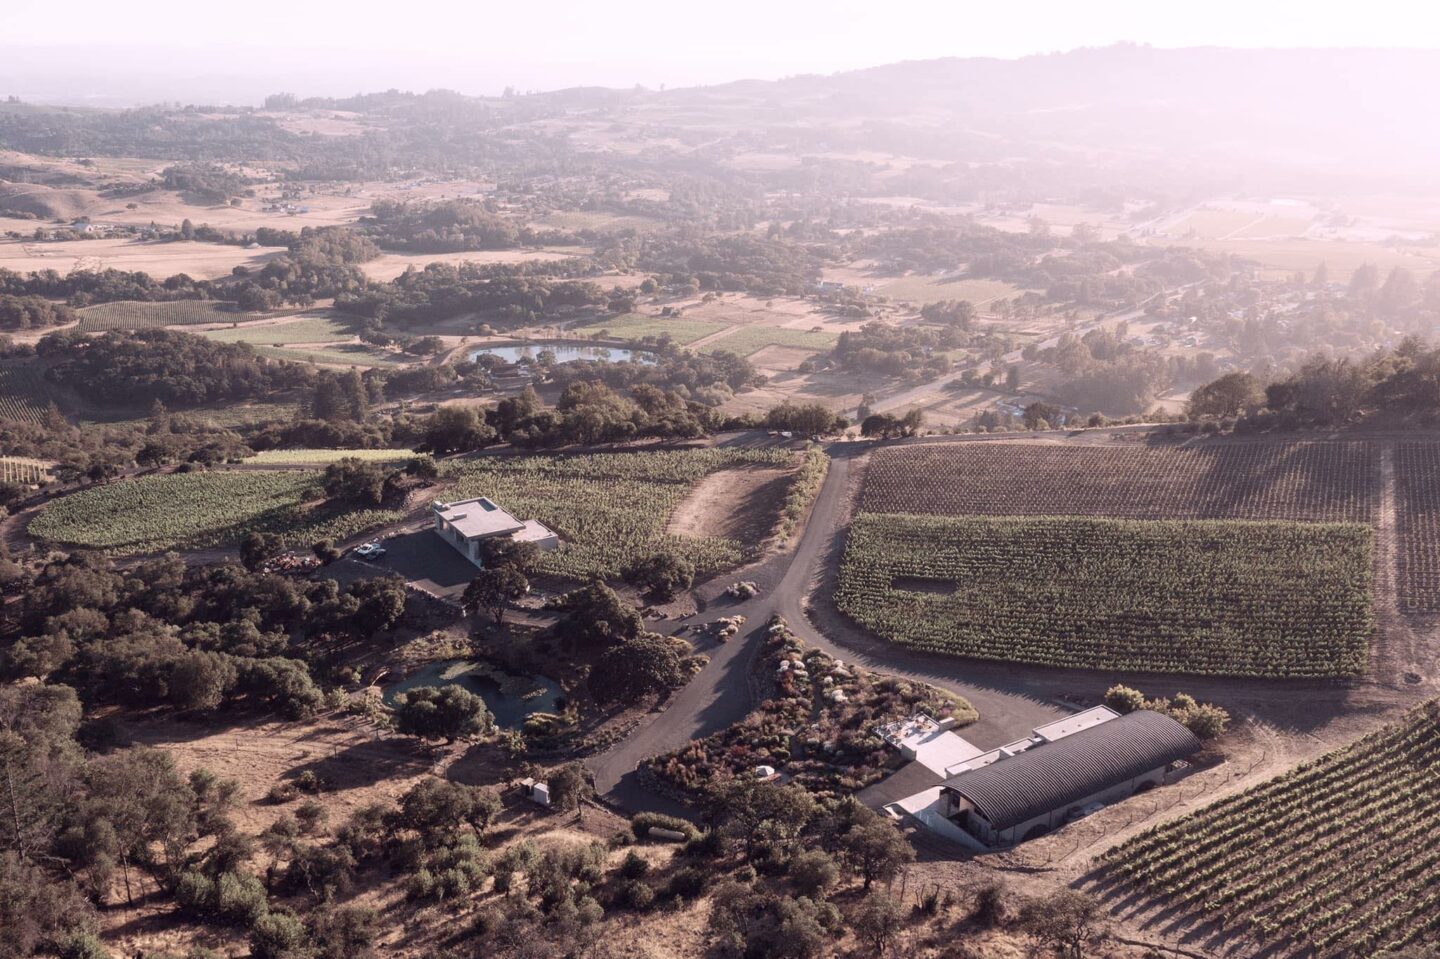 Coursey Graves Winery and Estate